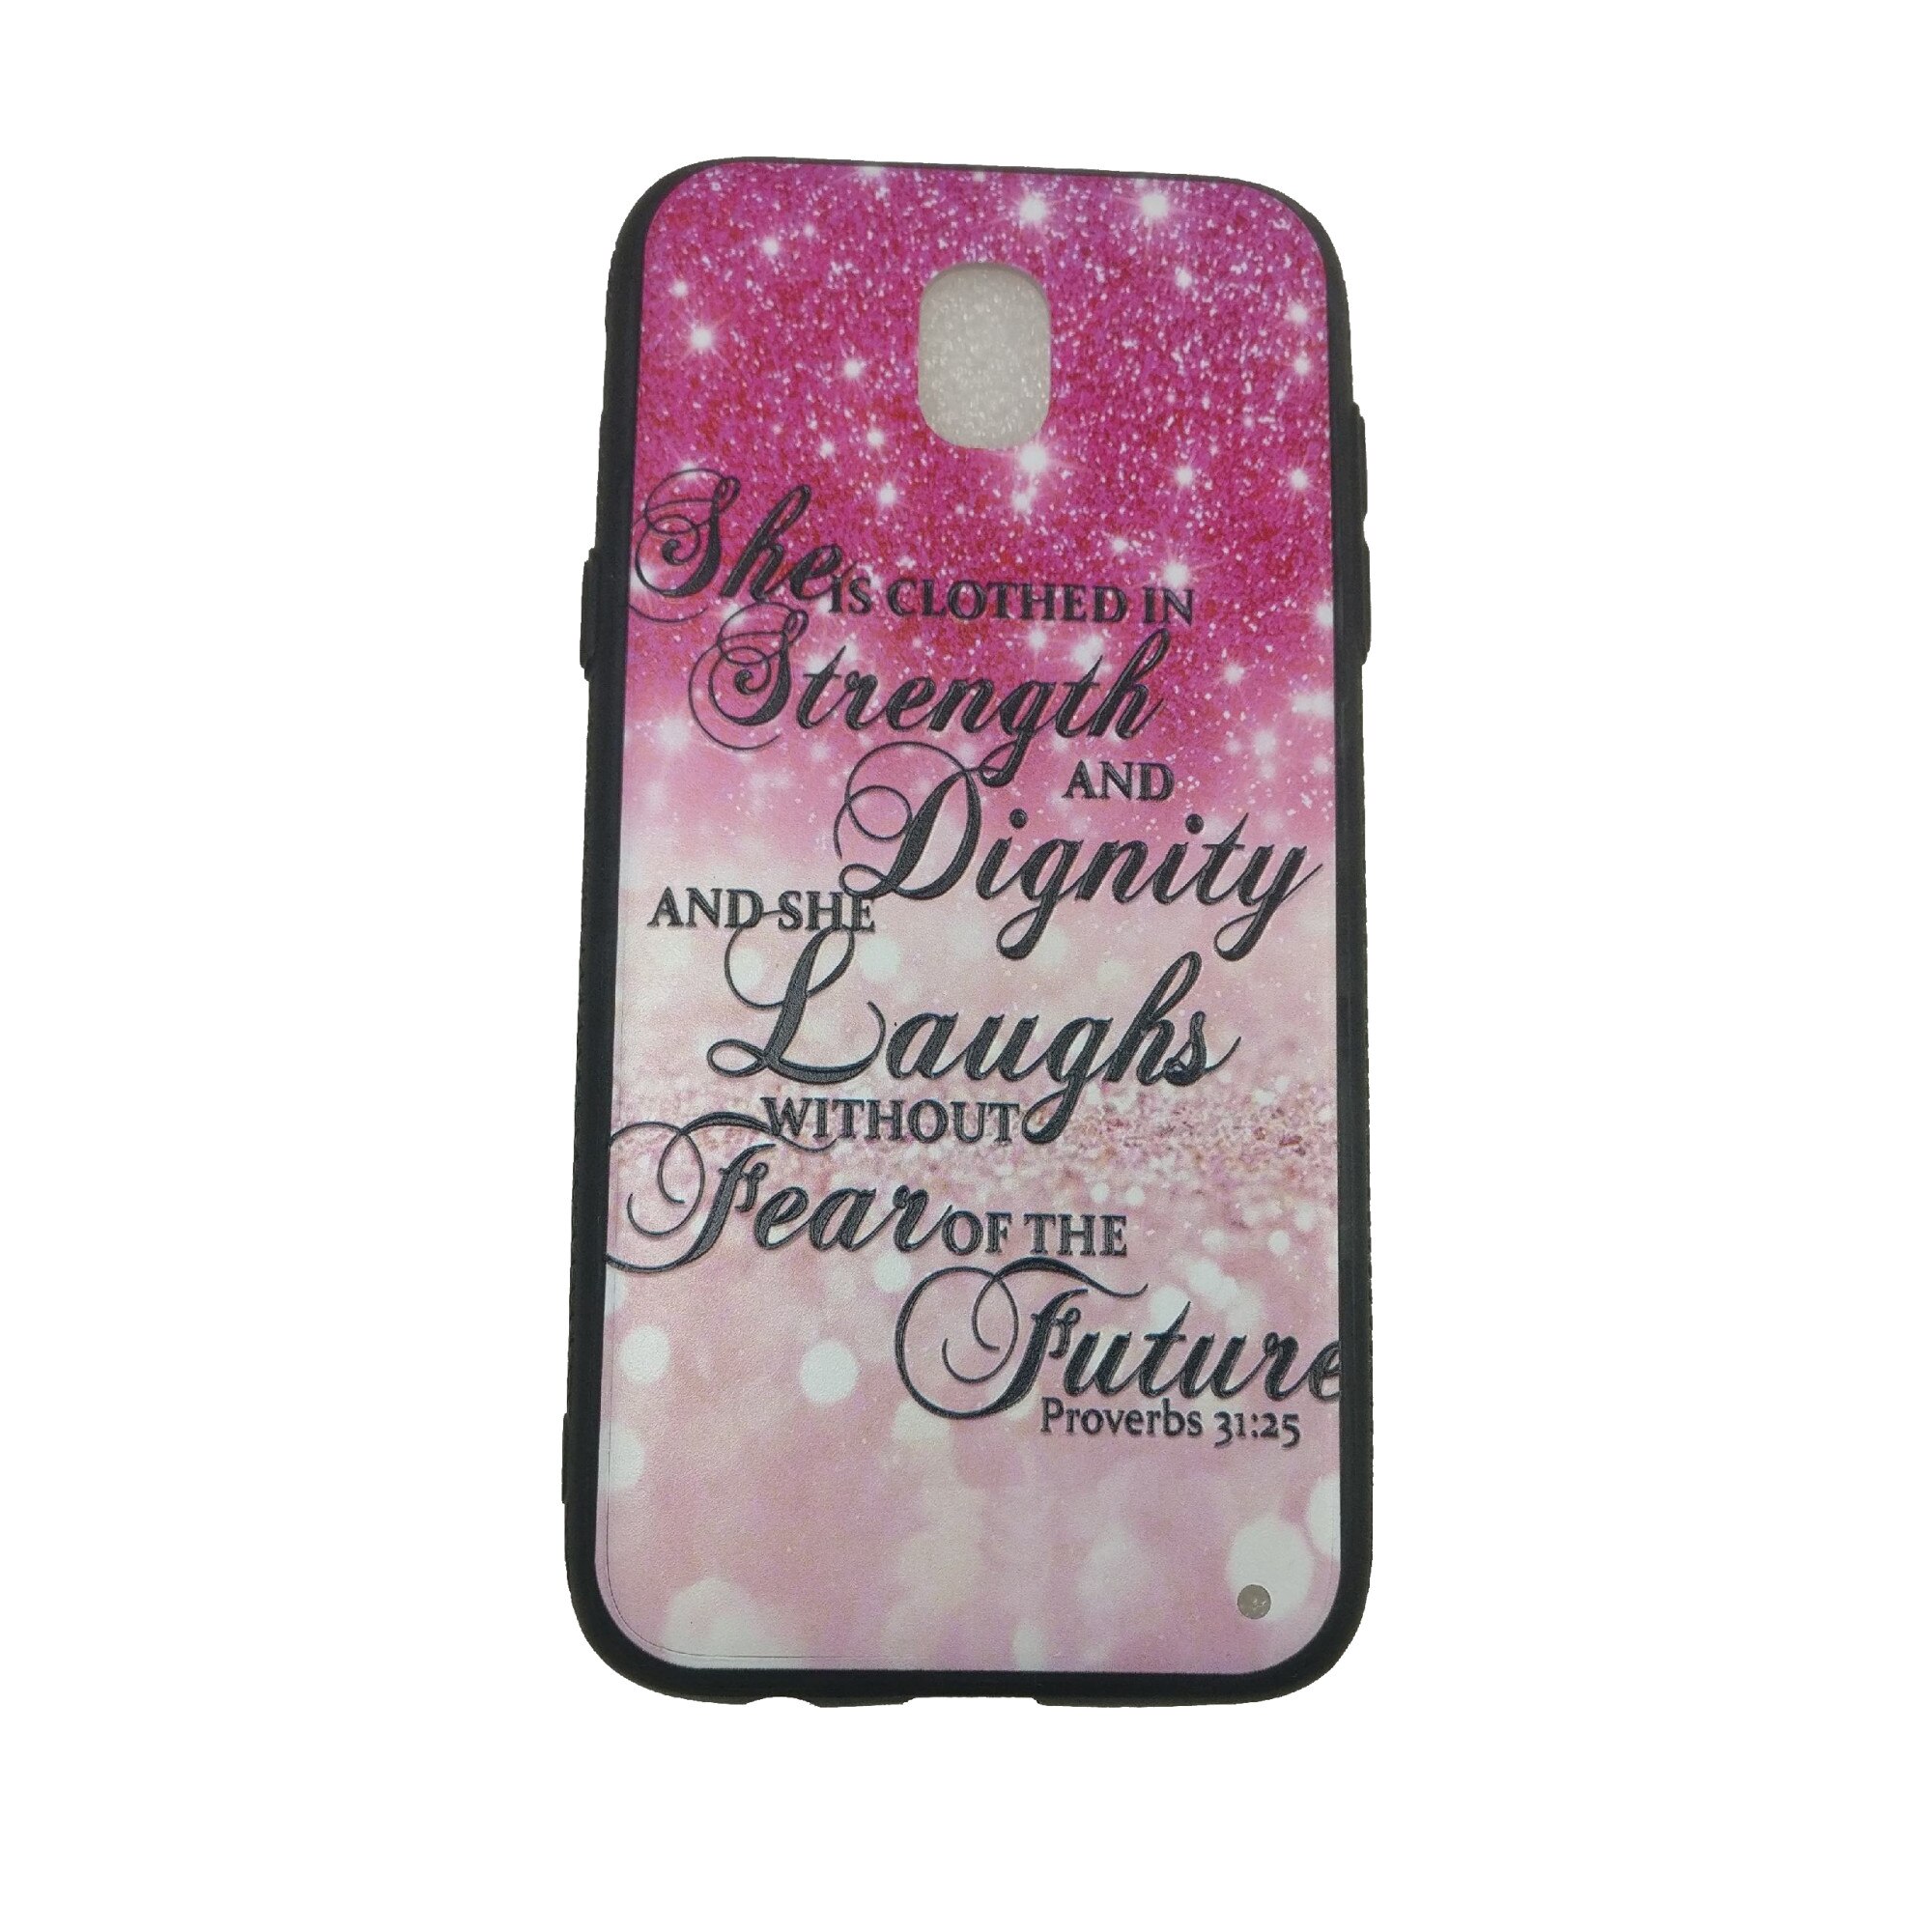 Quilt Menda City Monopoly Husa Samsung Galaxy J5 2017, Girl Power in relief, Roz - eMAG.ro